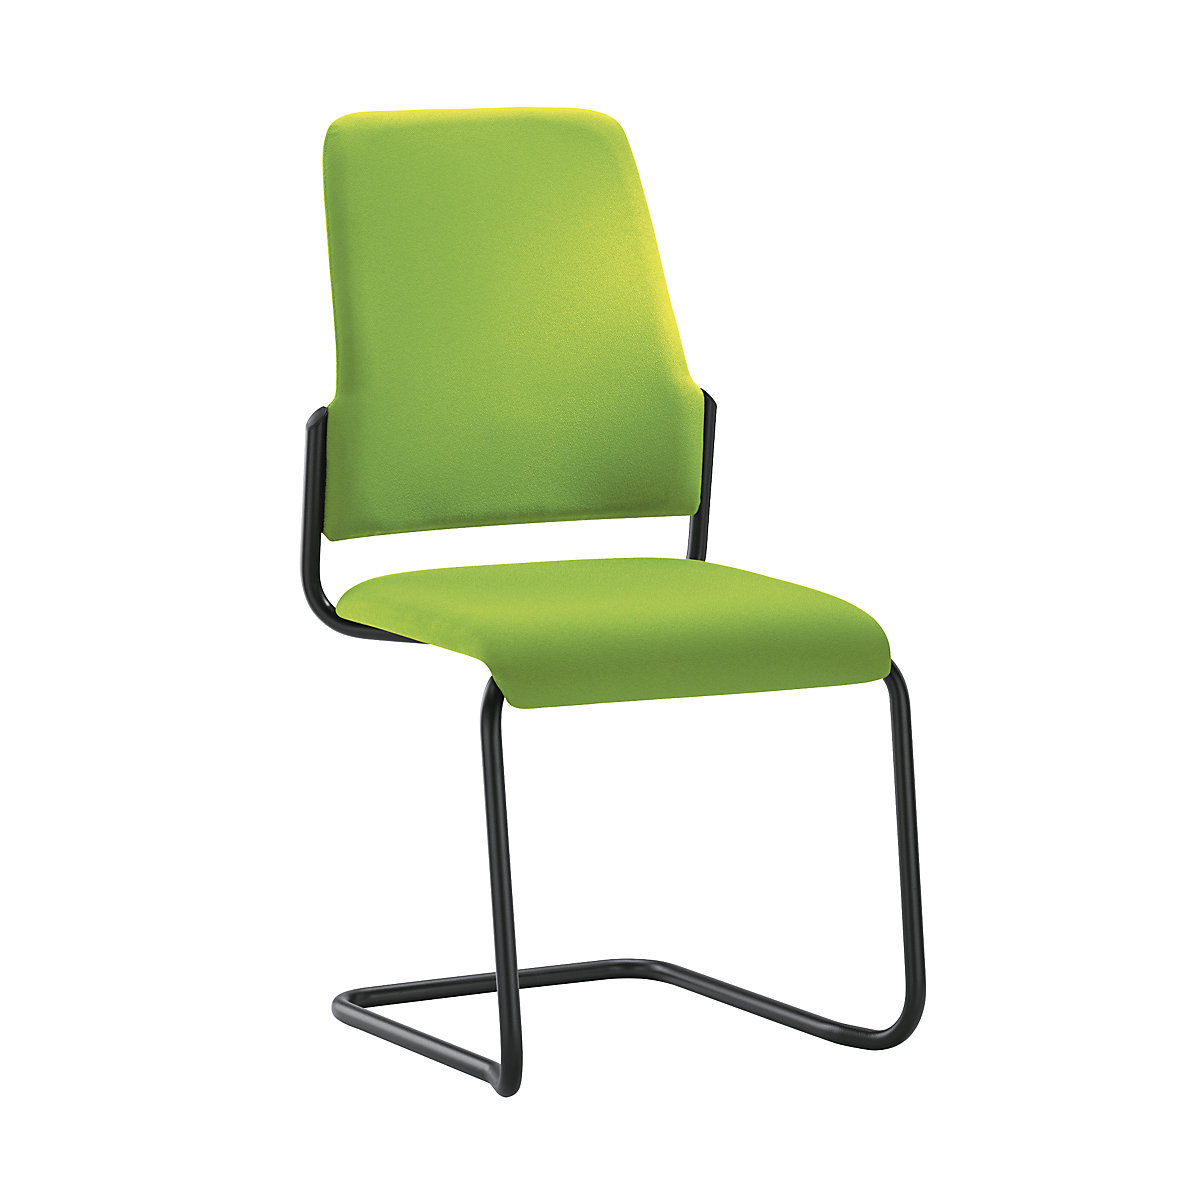 GOAL visitors' chair, cantilever, pack of 2 – interstuhl